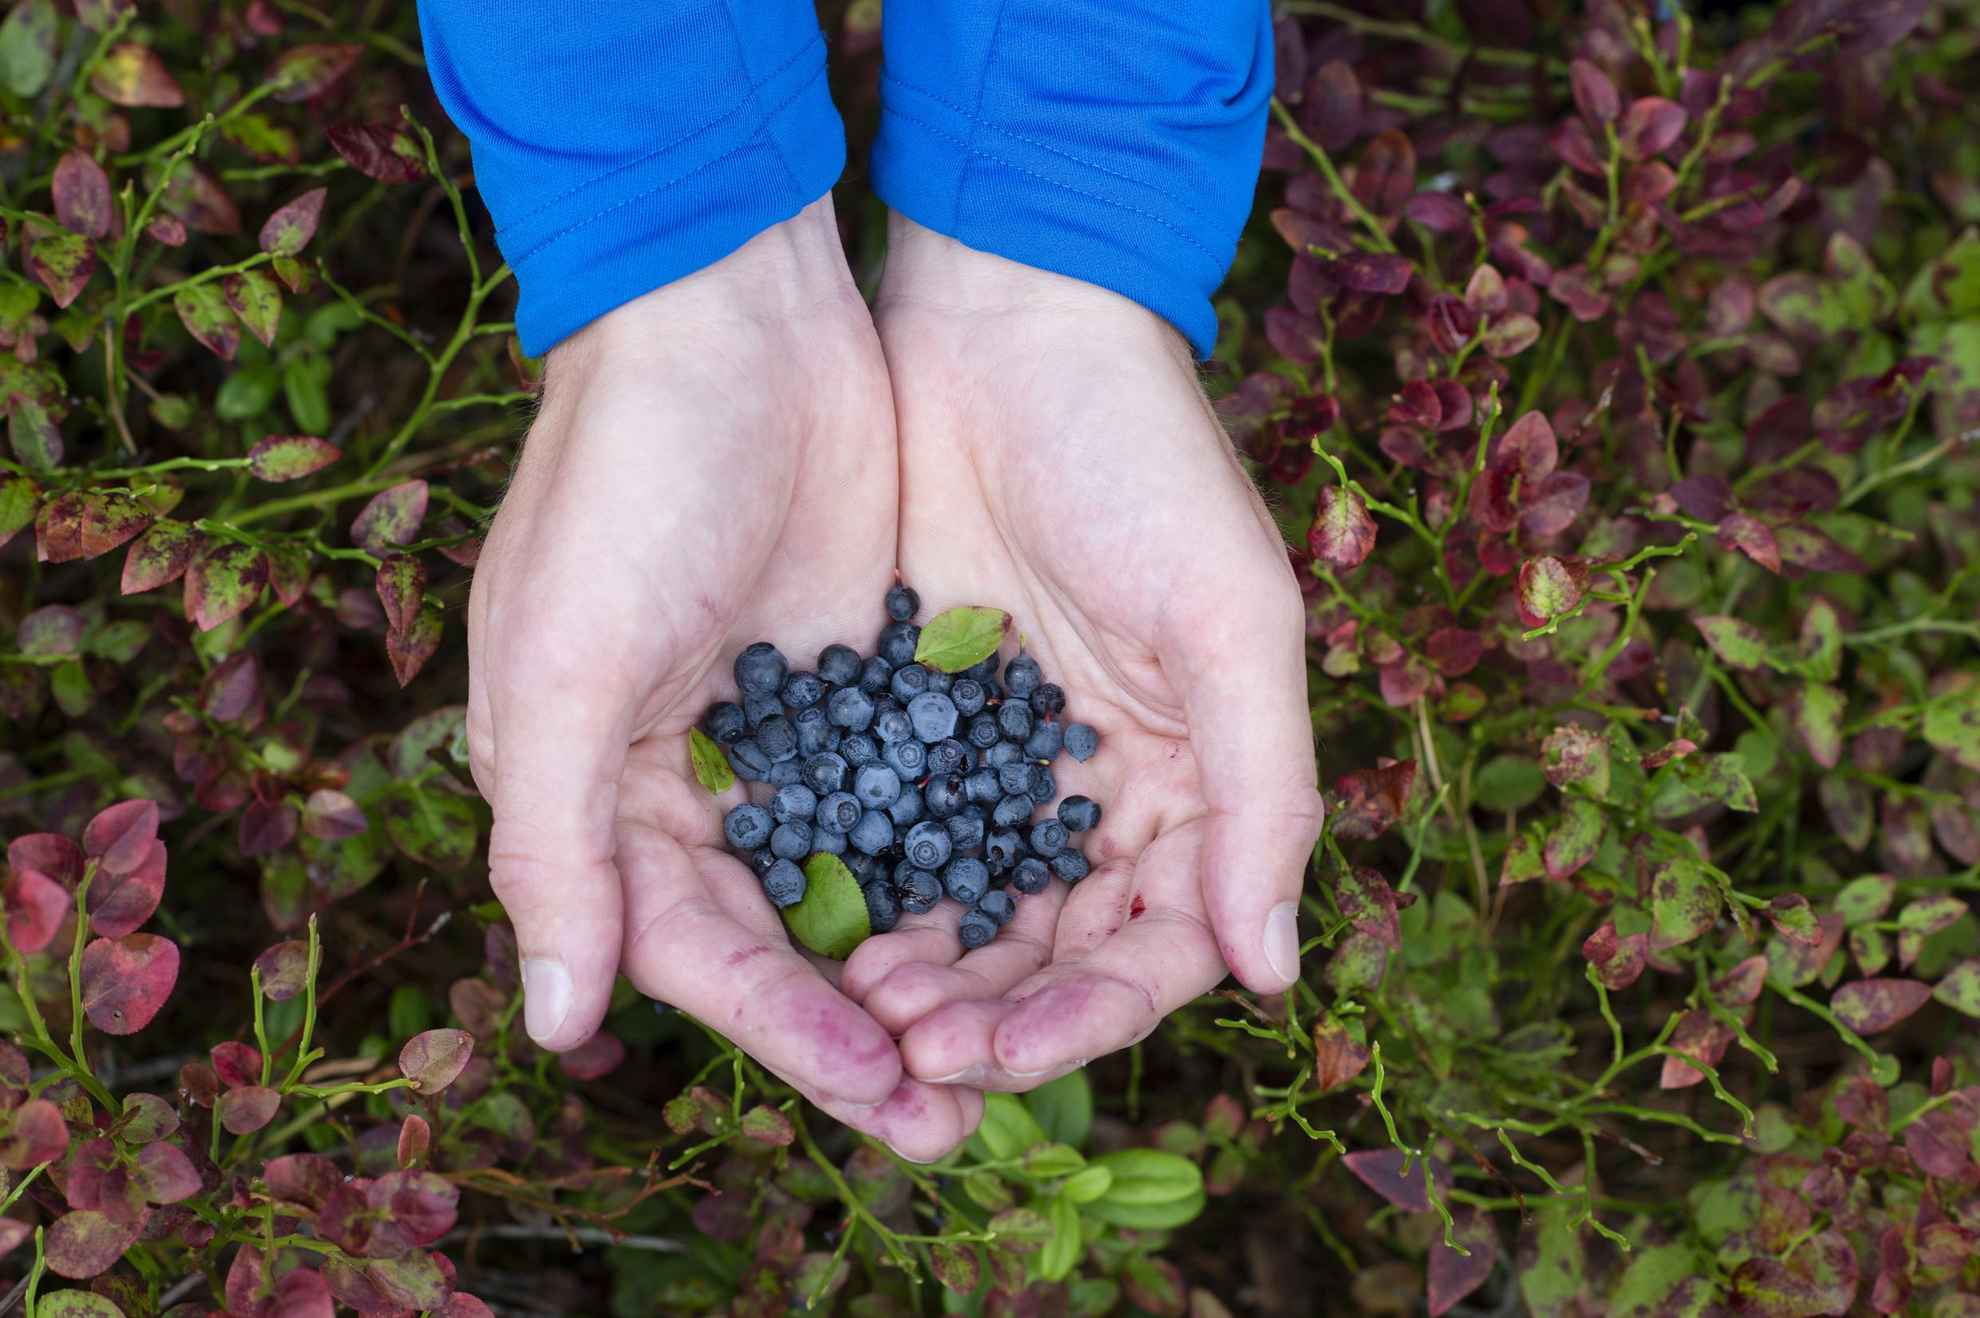 Blueberries from West Sweden